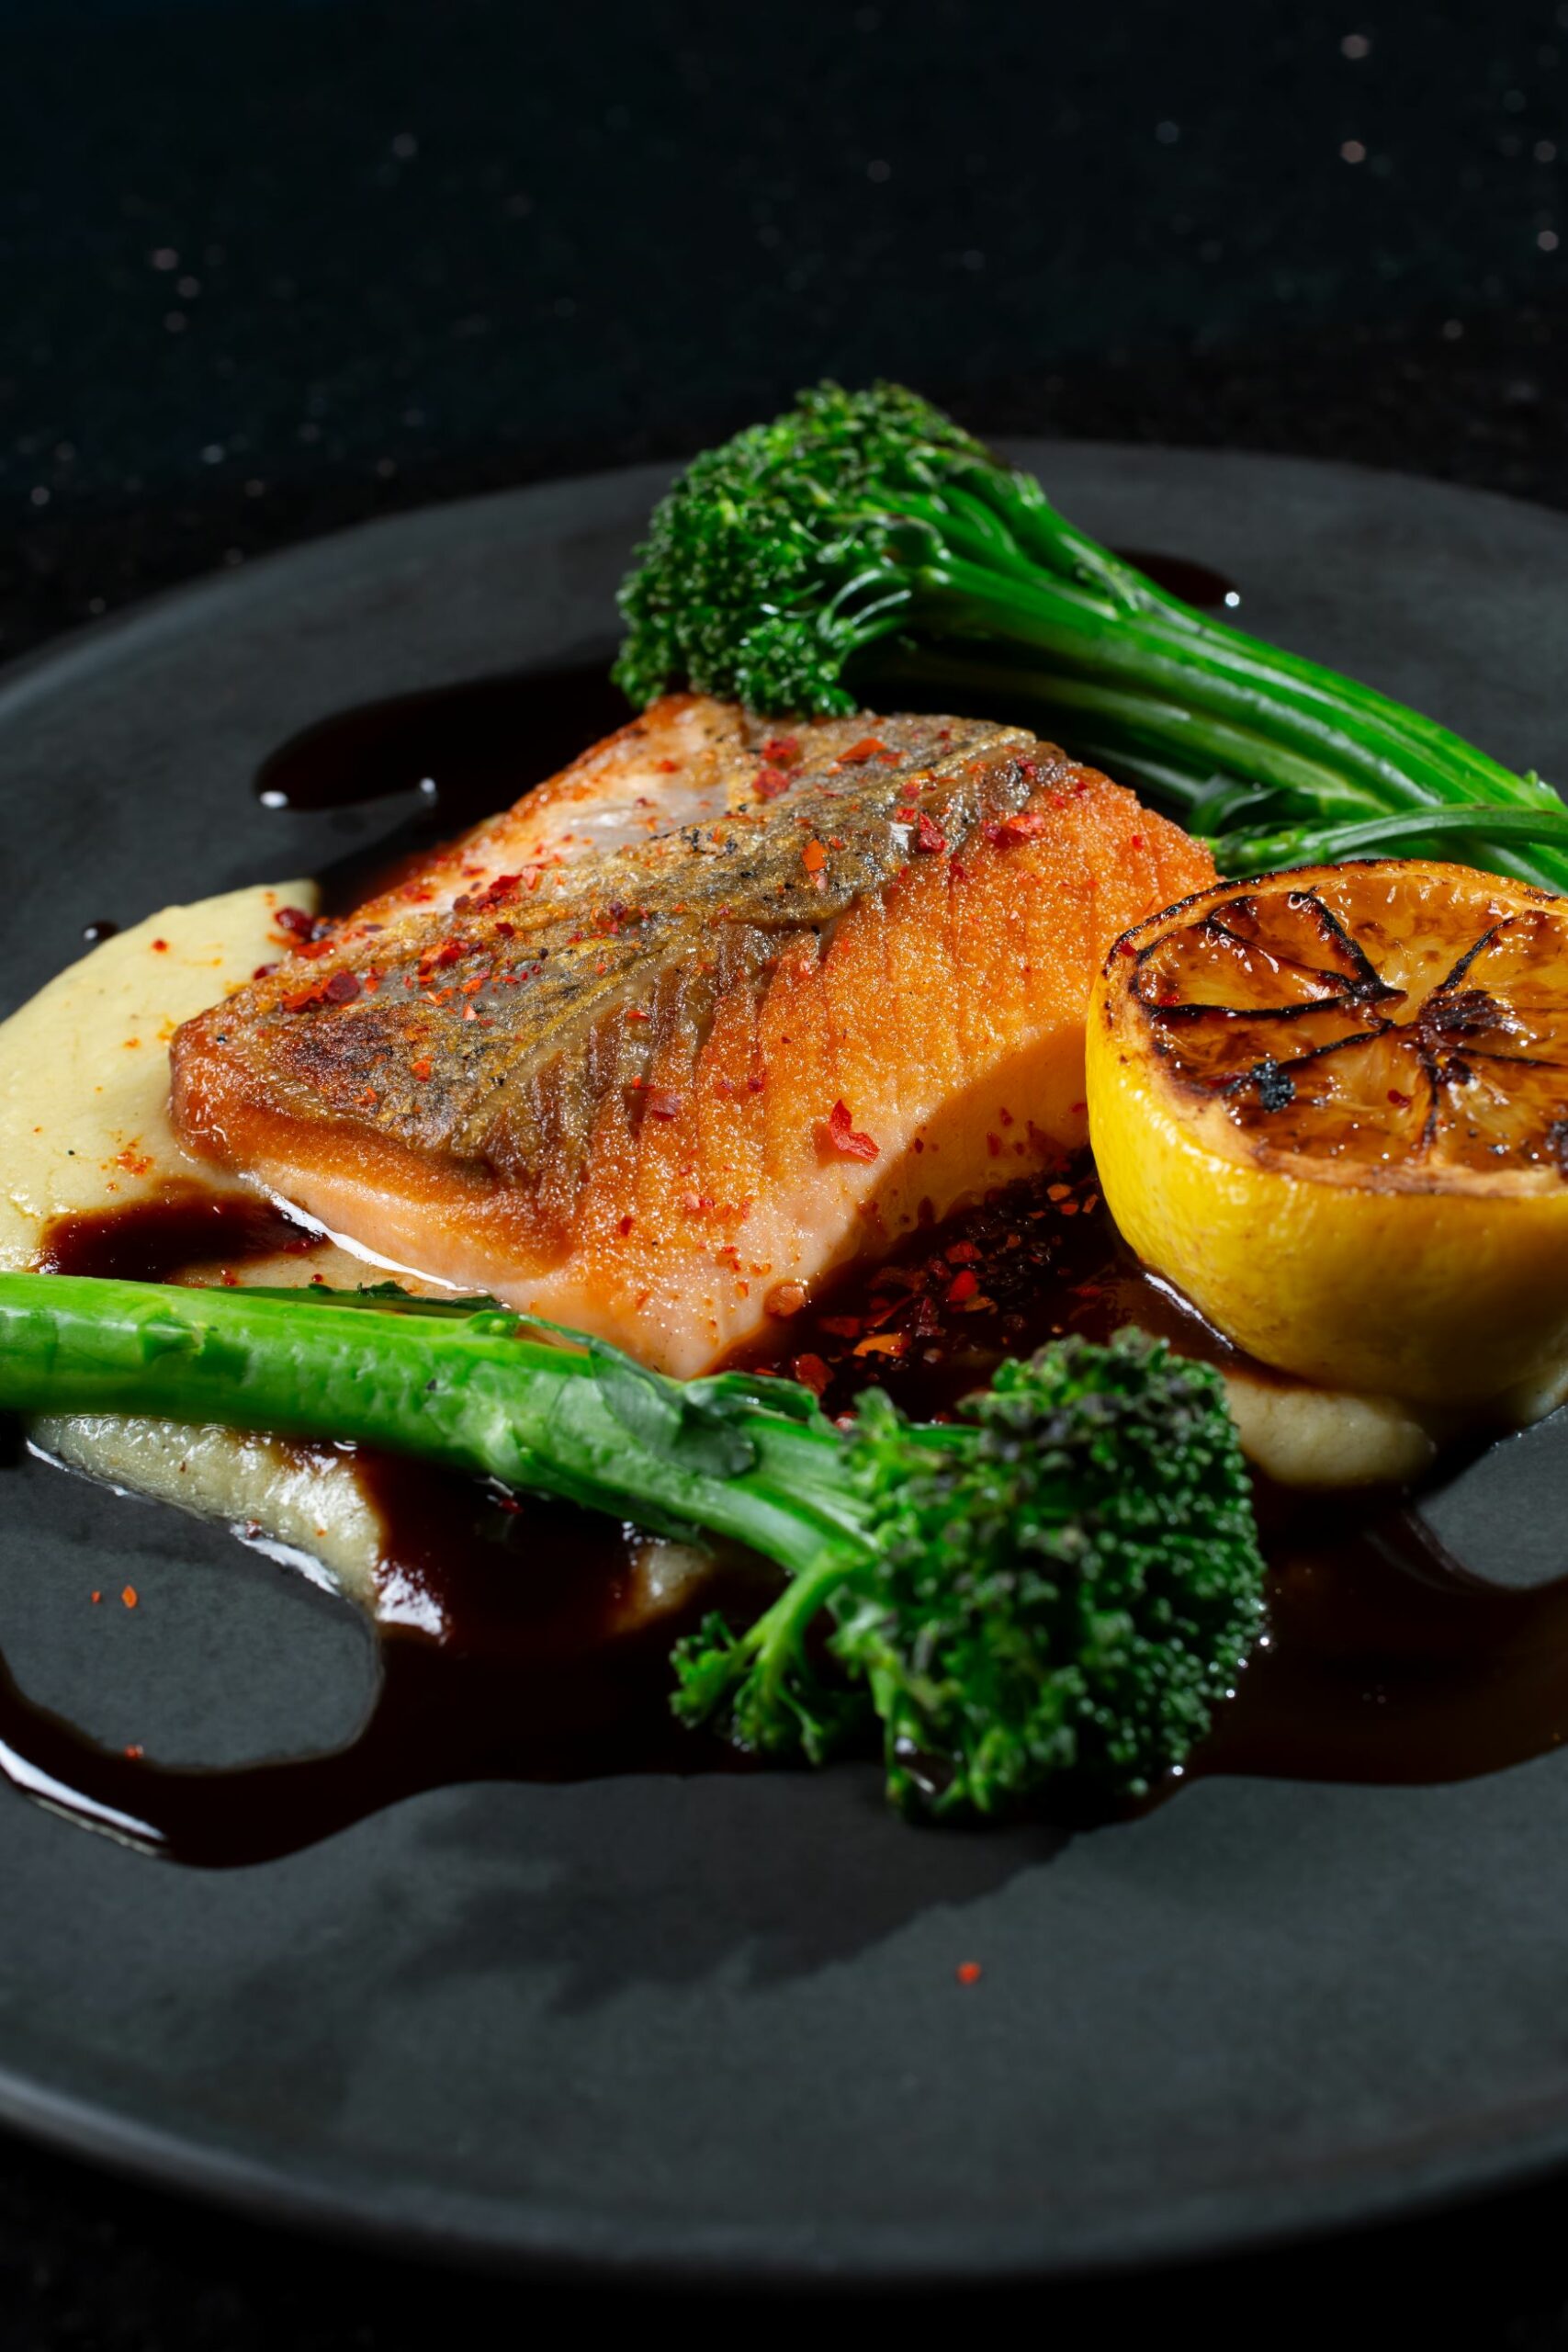 An image of Wolfsglen's Seared Salmon.